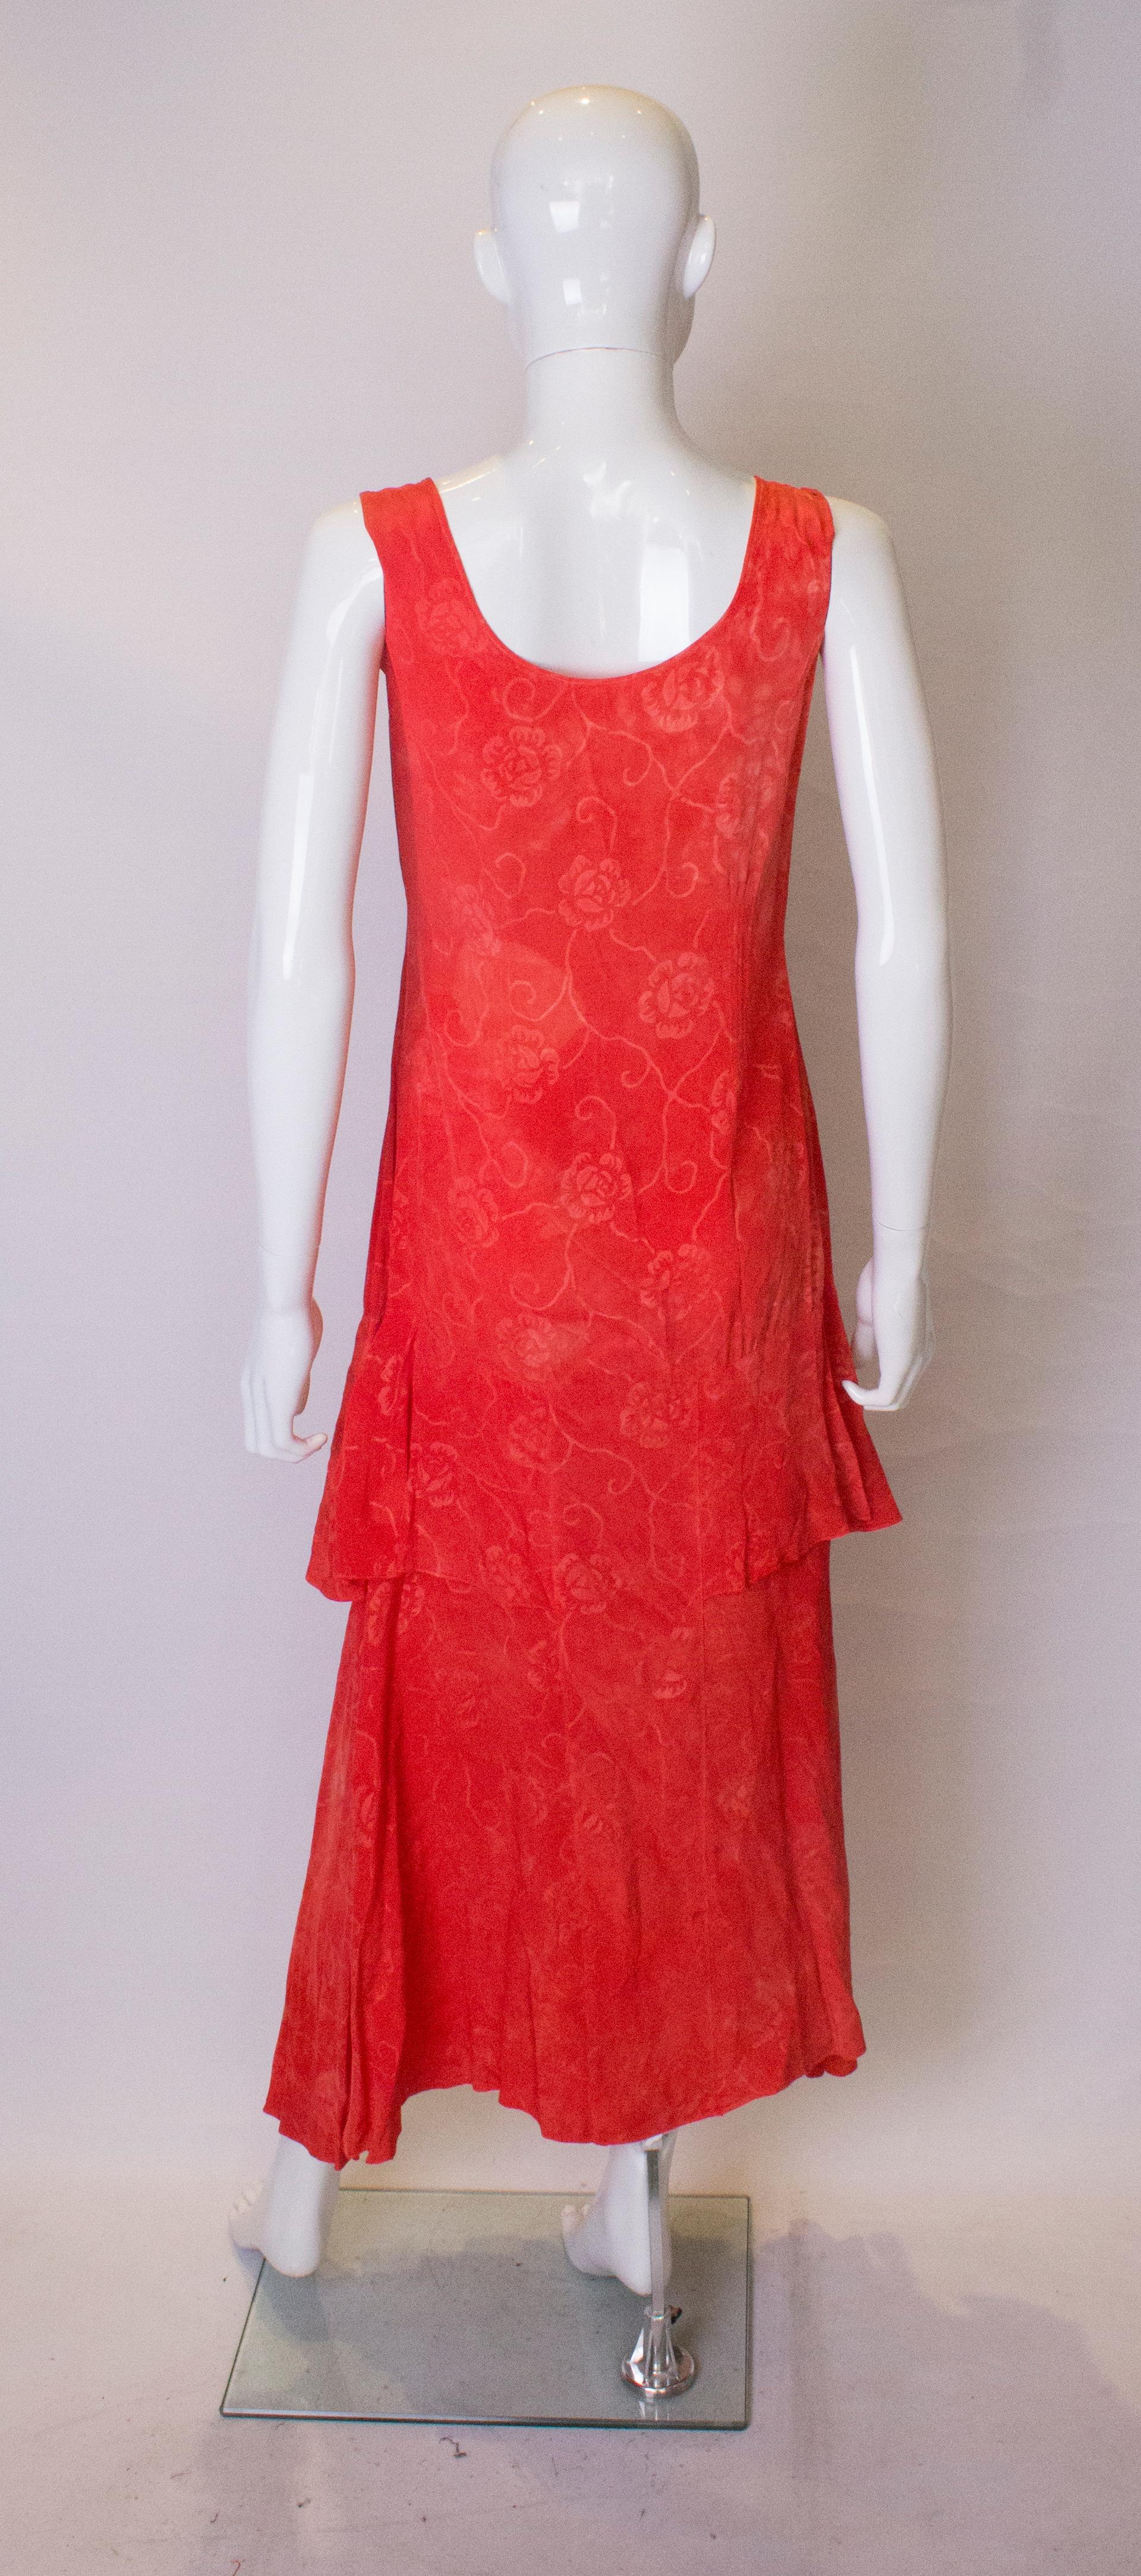 Vintage 1920s Silk Dress with Decorative Belt In Good Condition For Sale In London, GB